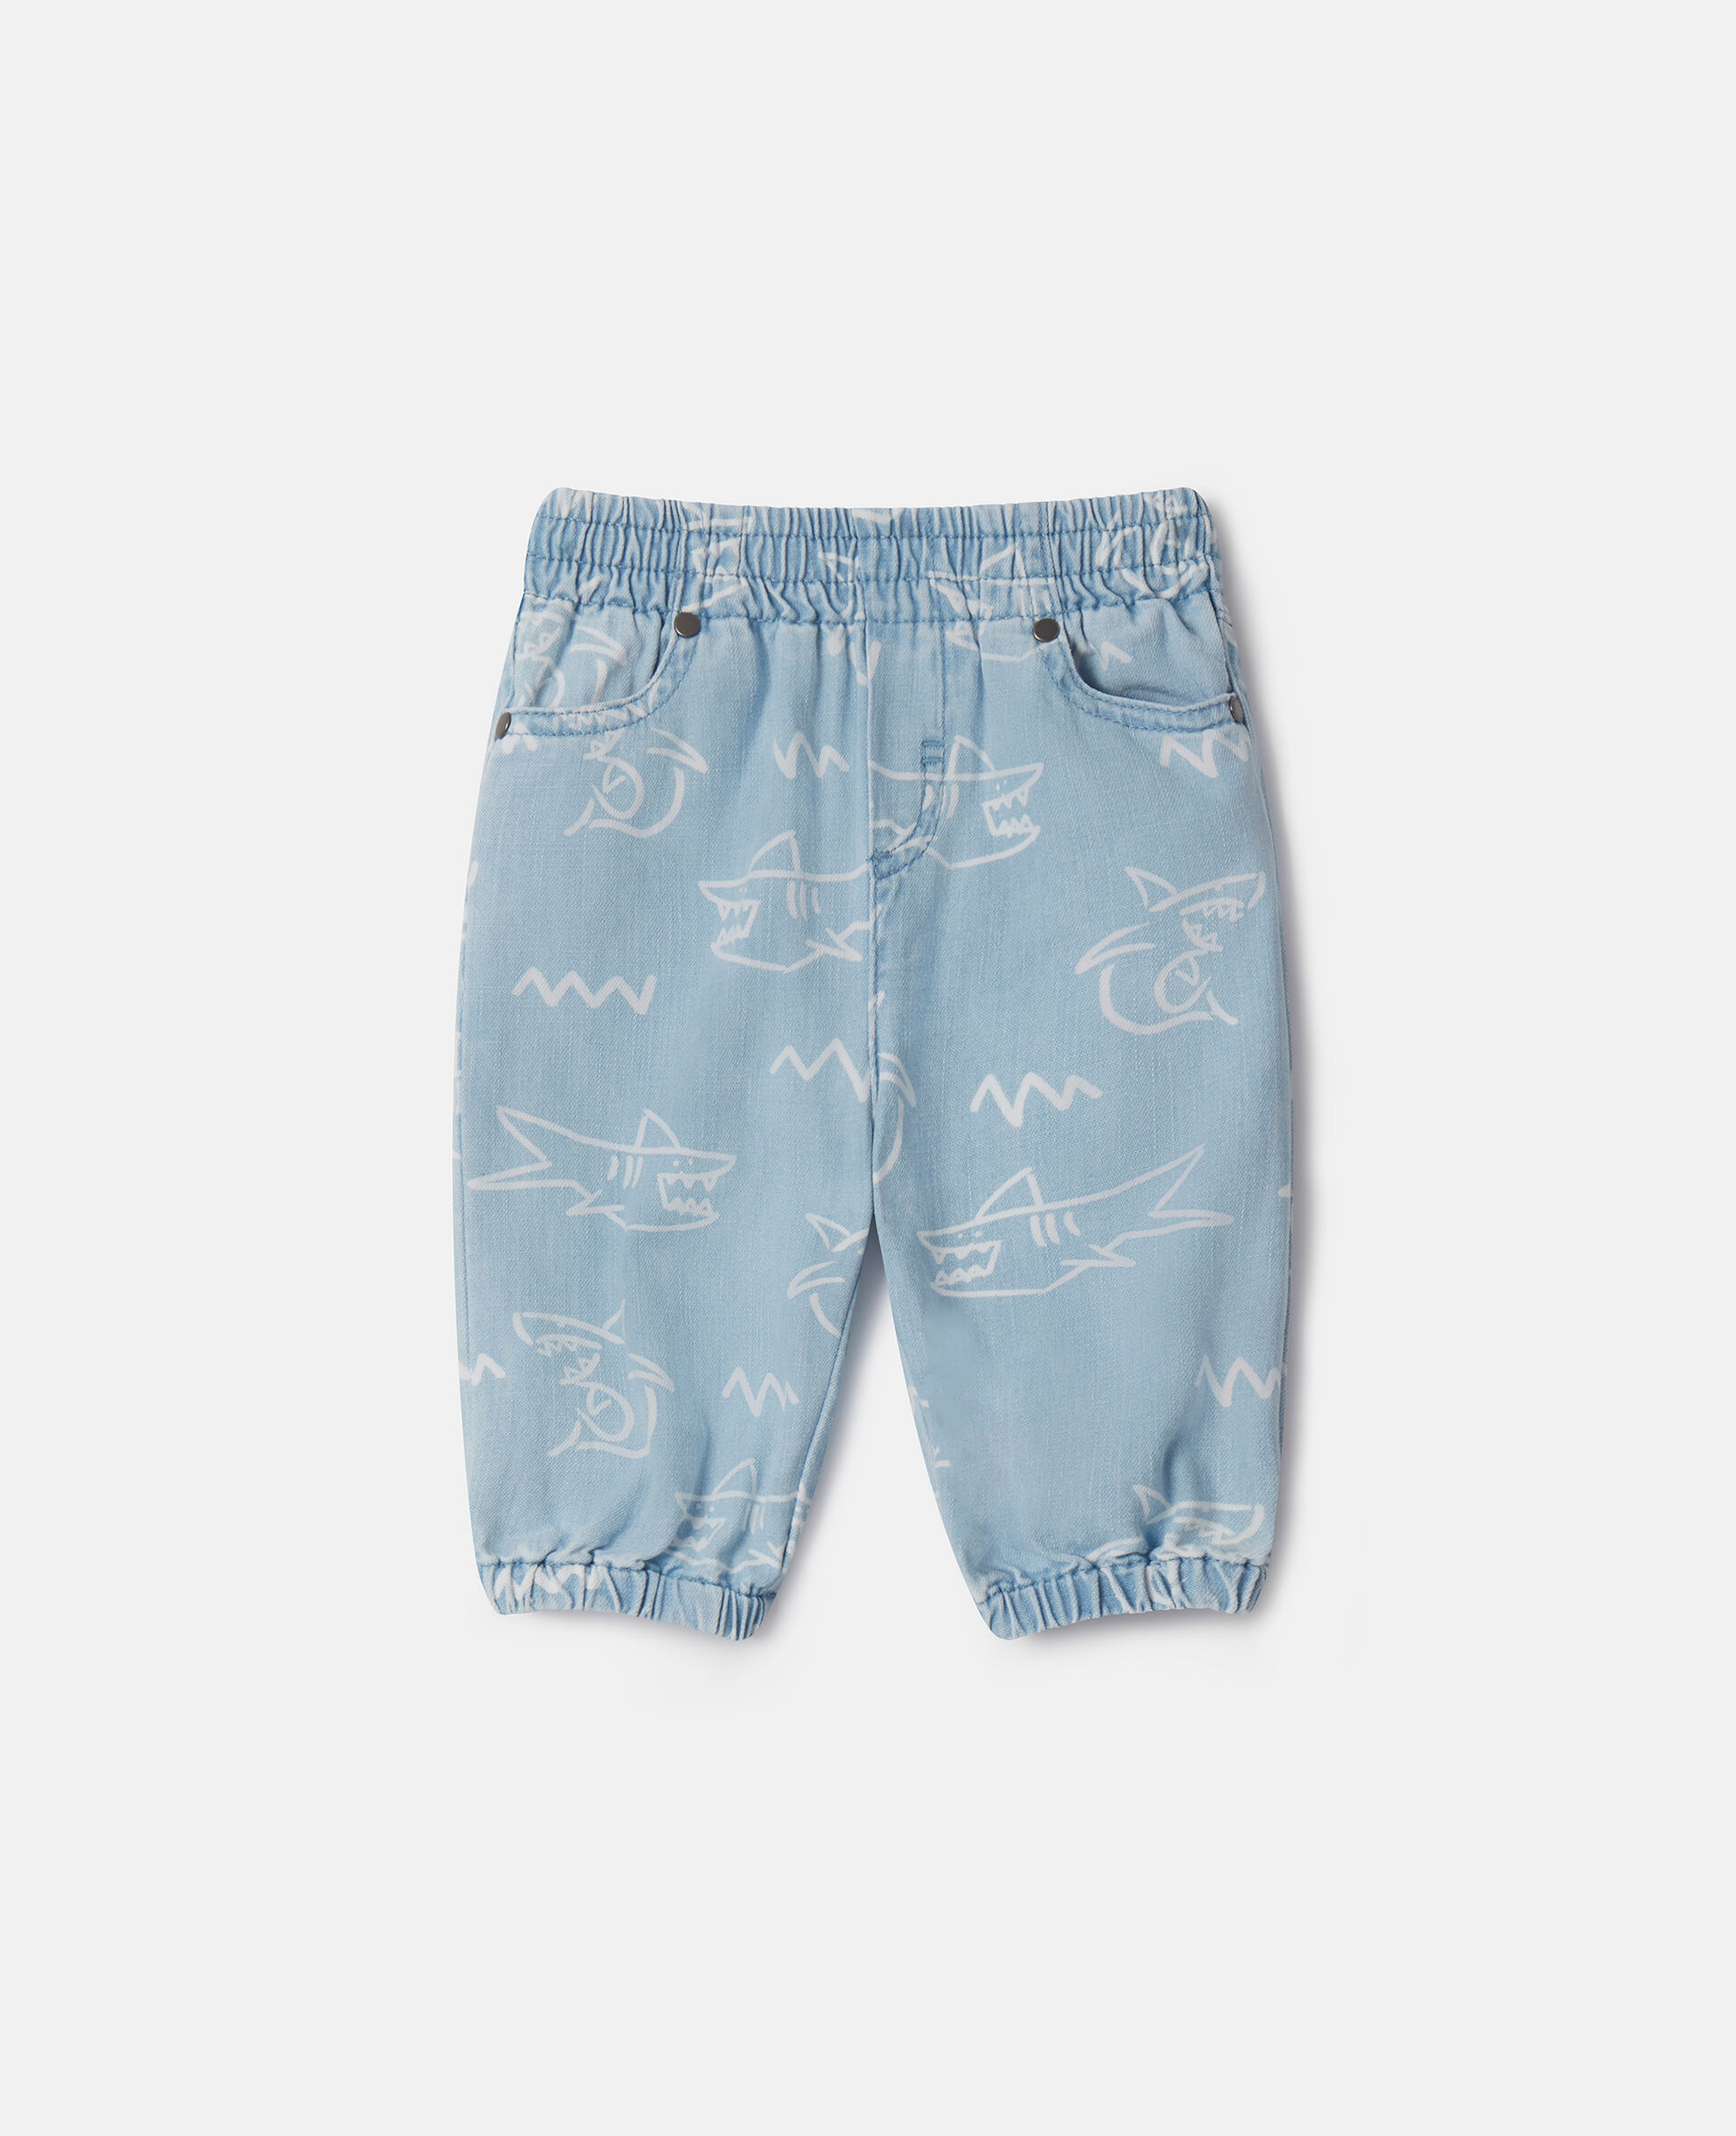 Shark Print Baby Jeans-蓝色-large image number 0